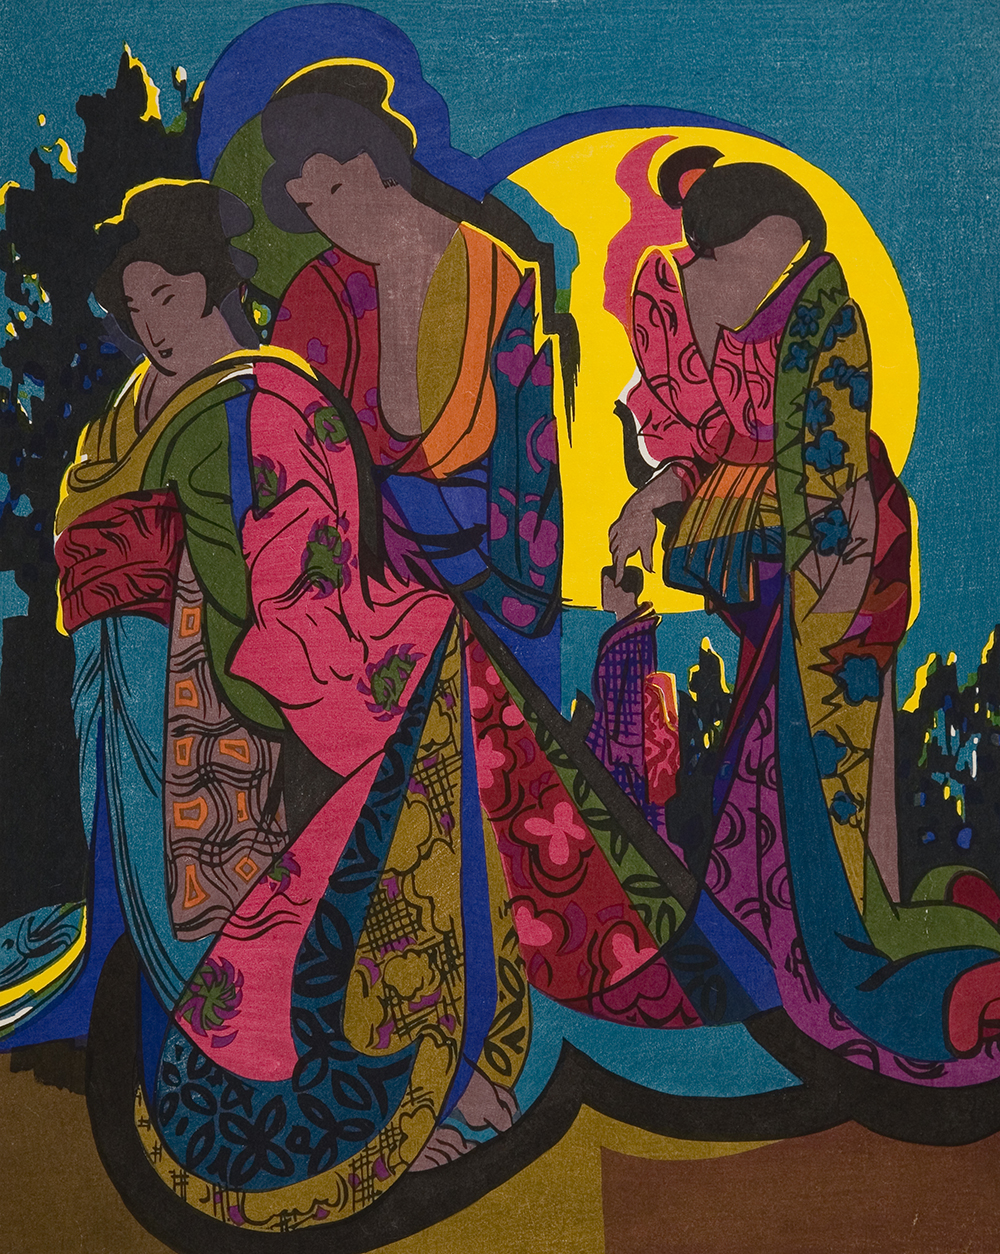 Three women in traditional Japanese clothes stand in front of a large yellow moon. The clothes are covered in brightly colored patterns of flowers. Trees are in the background and the ground is brown dirt. All the figures are outlined in yellow highlights. 